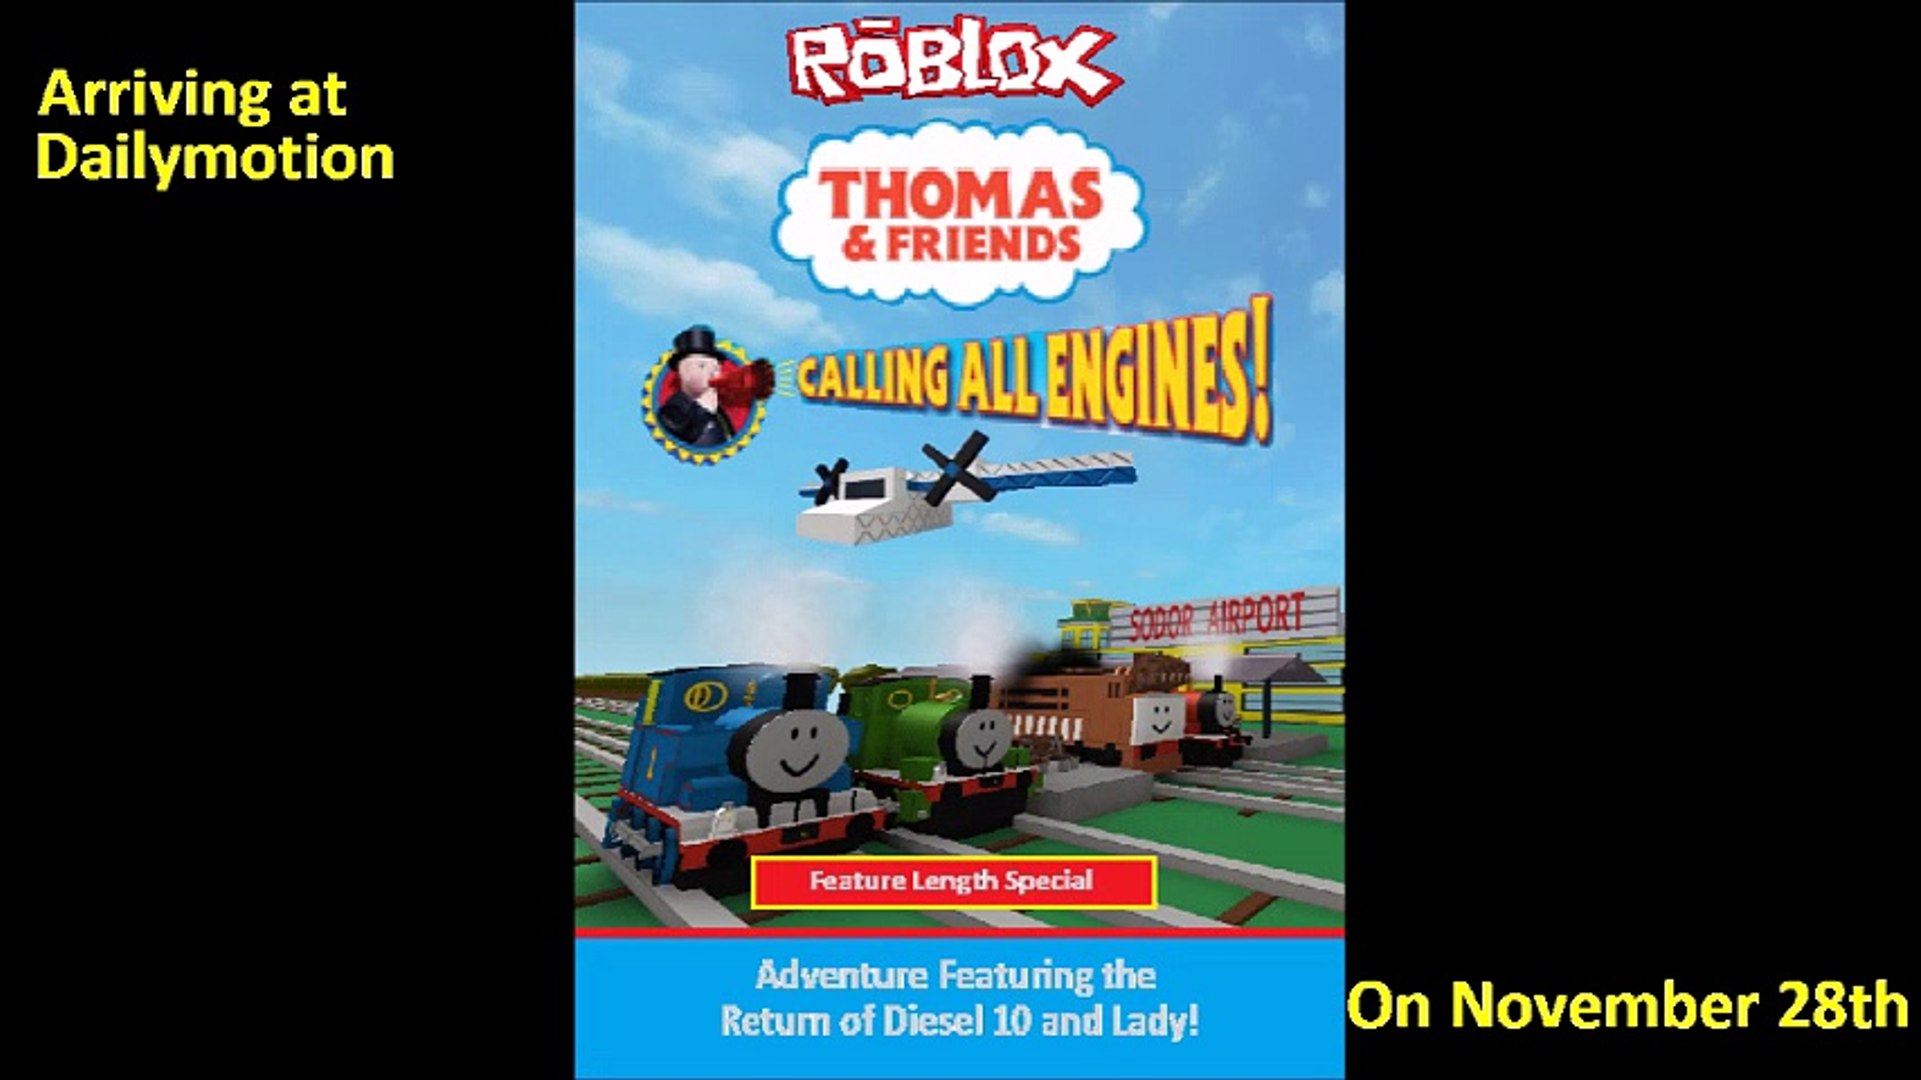 Roblox Calling All Engines Dailymotion Trailer Video Dailymotion - roblox 2005 trailer